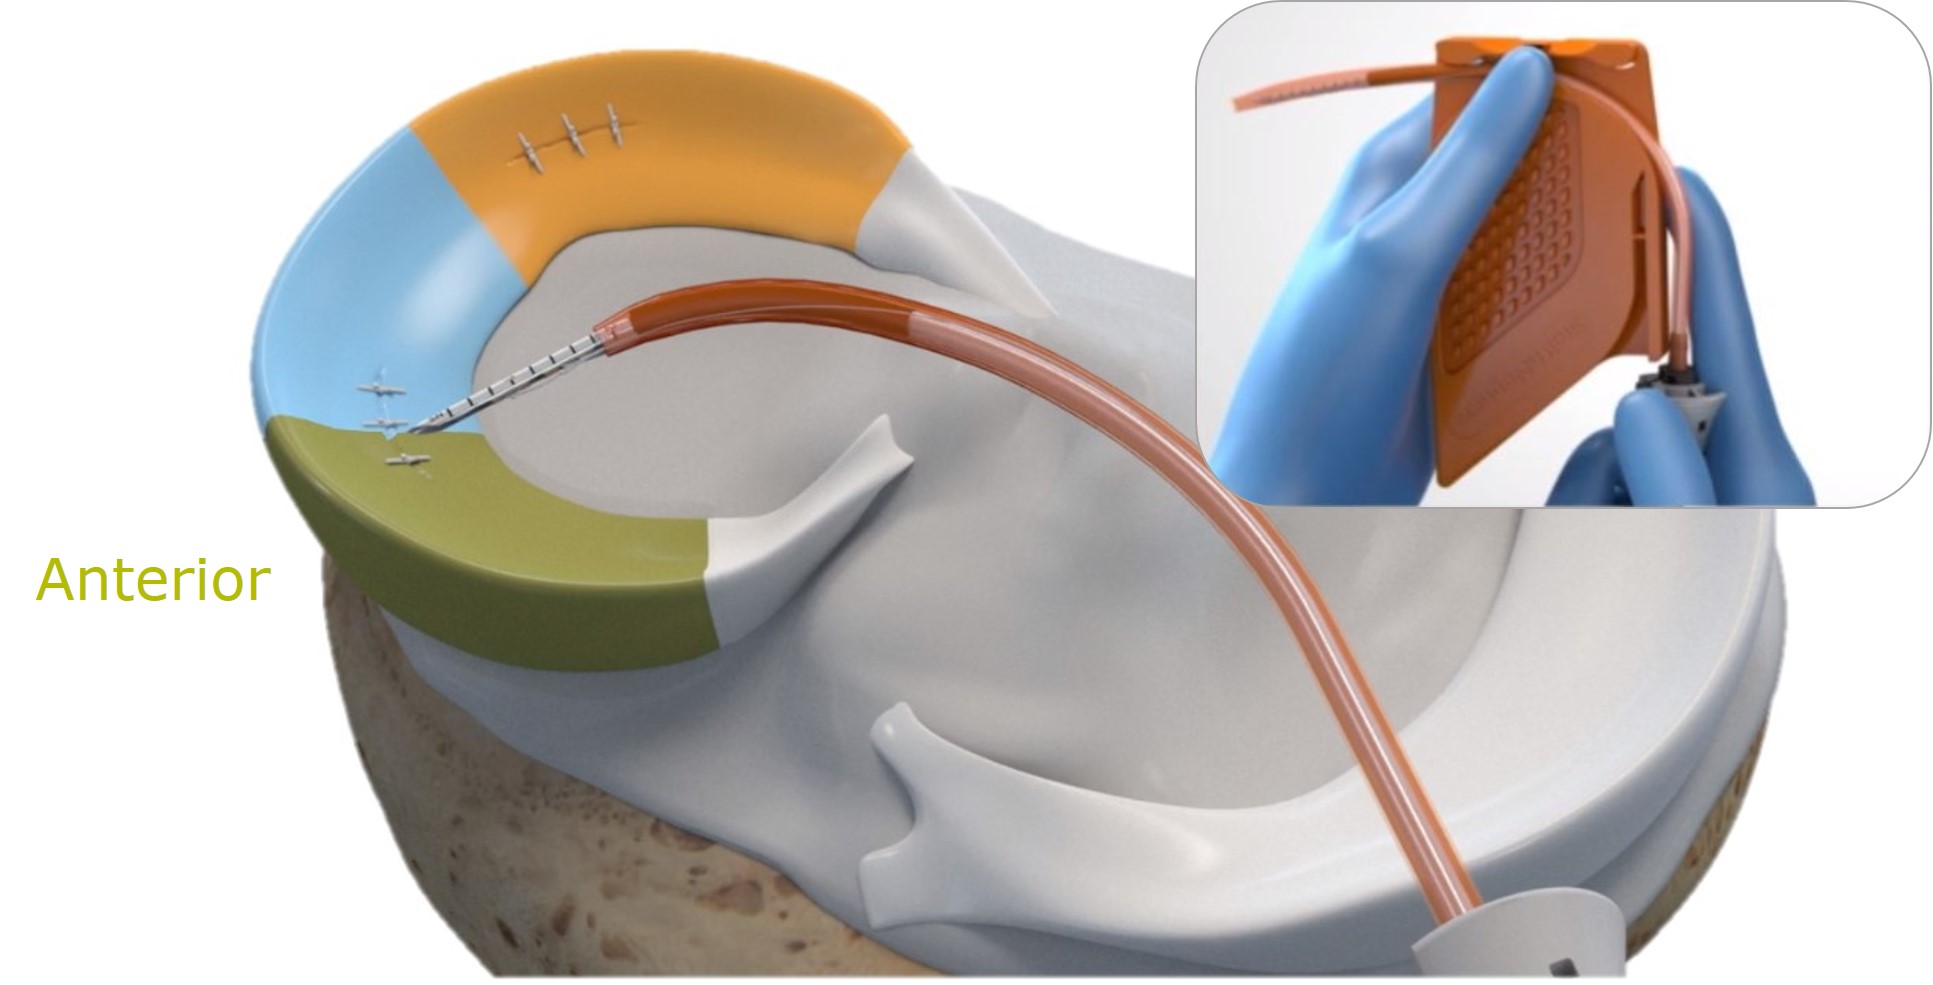 Sports Medicine technology for joint repair and connected arthroscopic tower during AAOS 2022 Annual Meeting